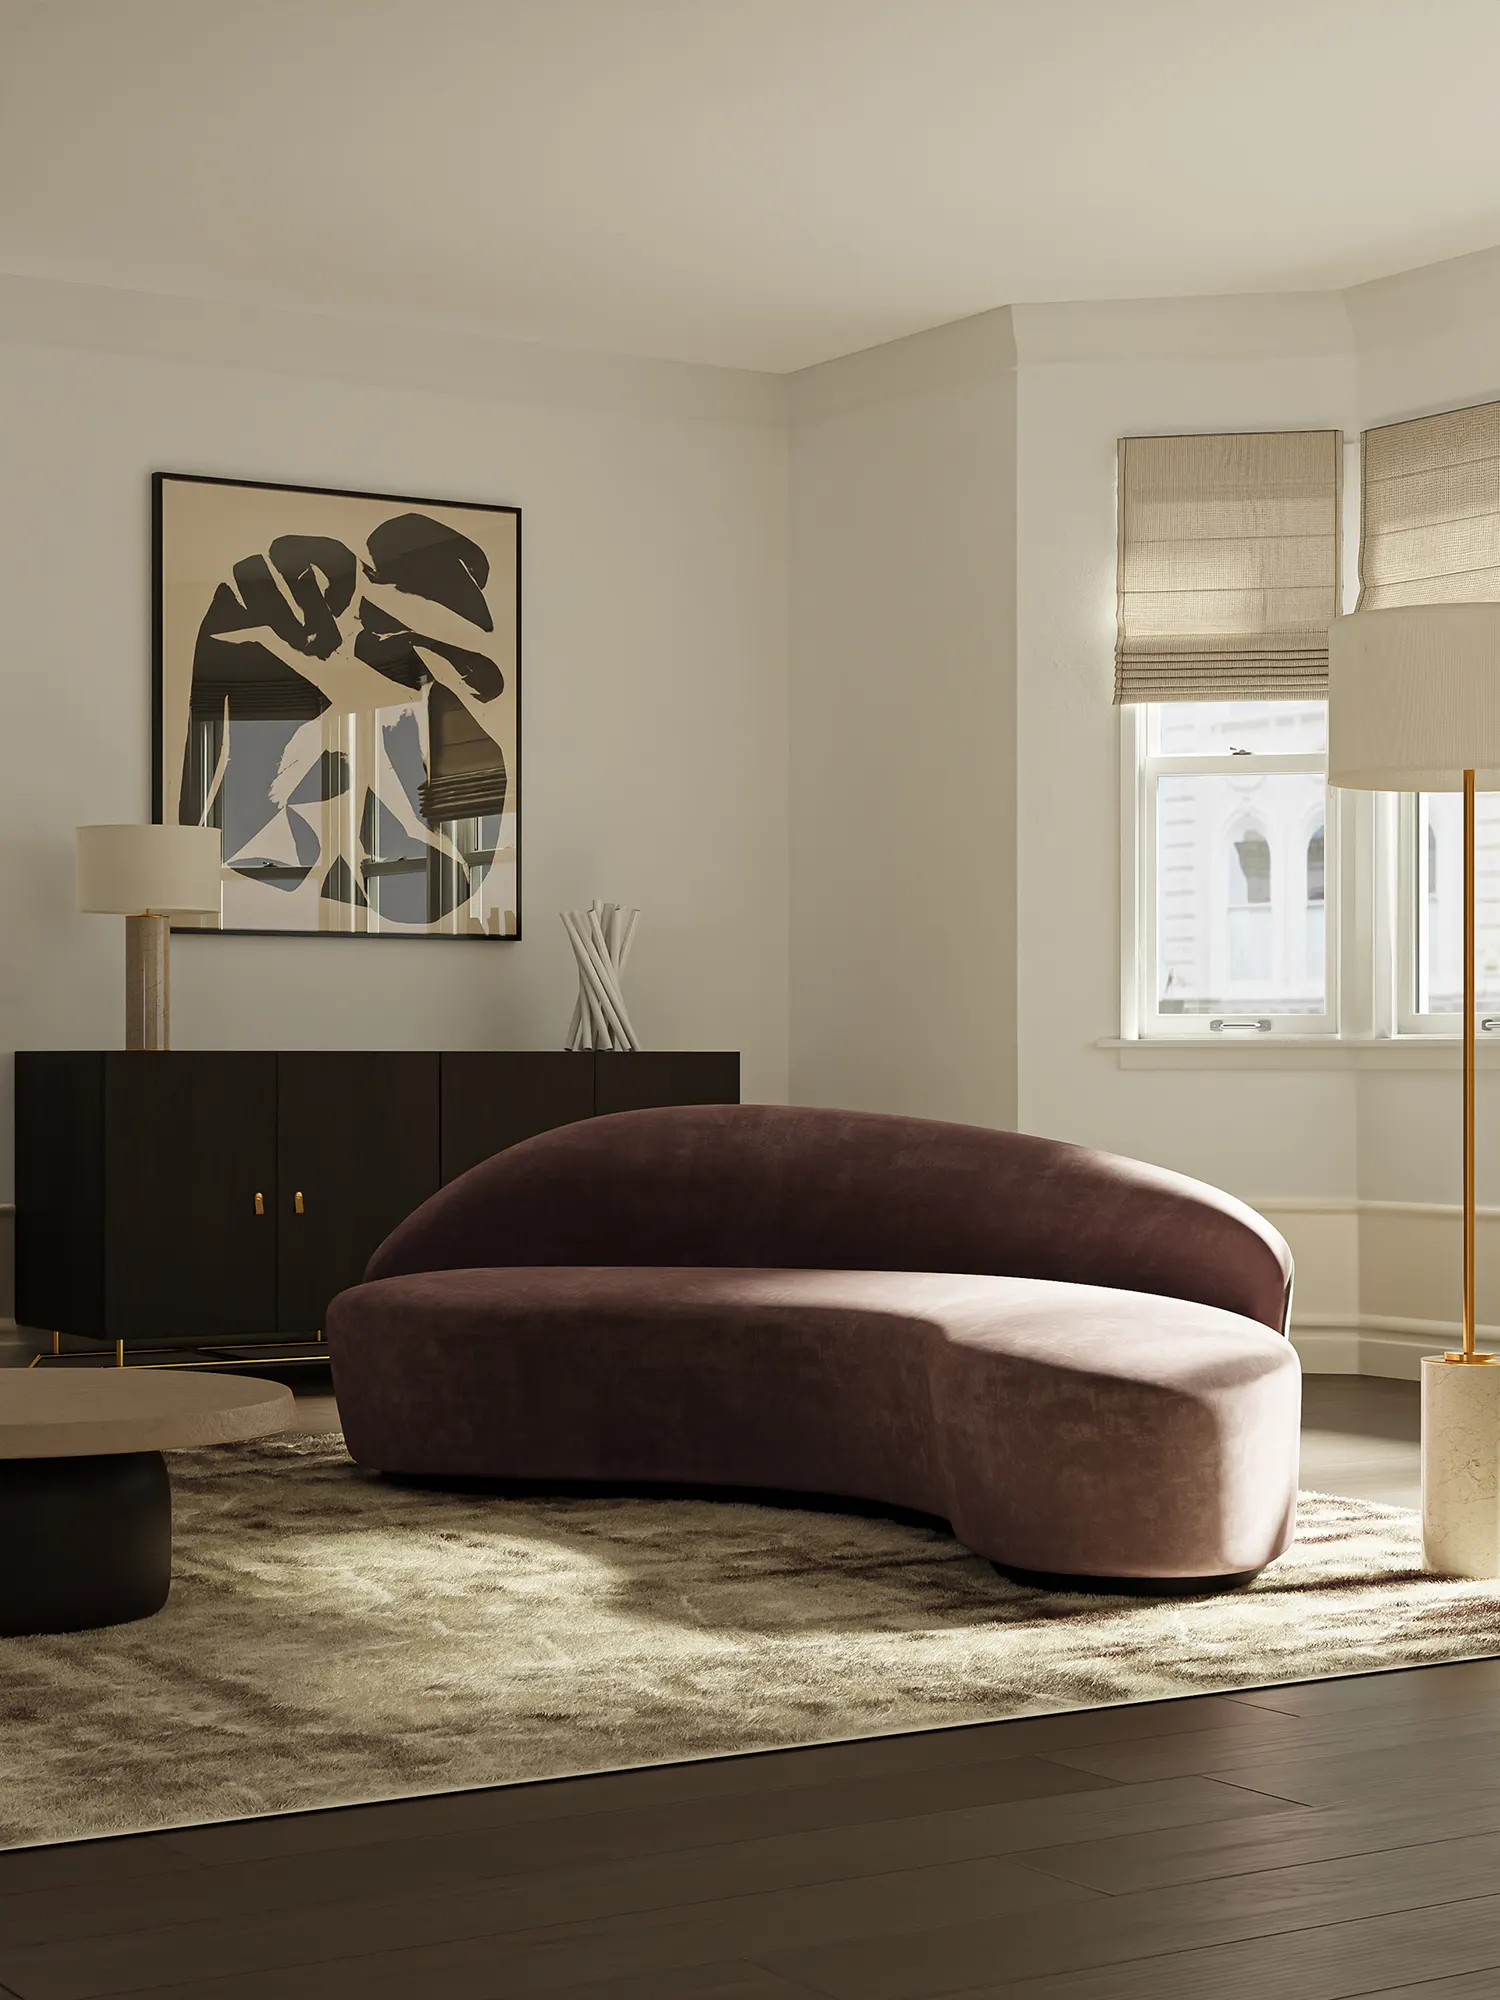 Moonlight sofa combines two velvets to design a showstopping piece of furniture.